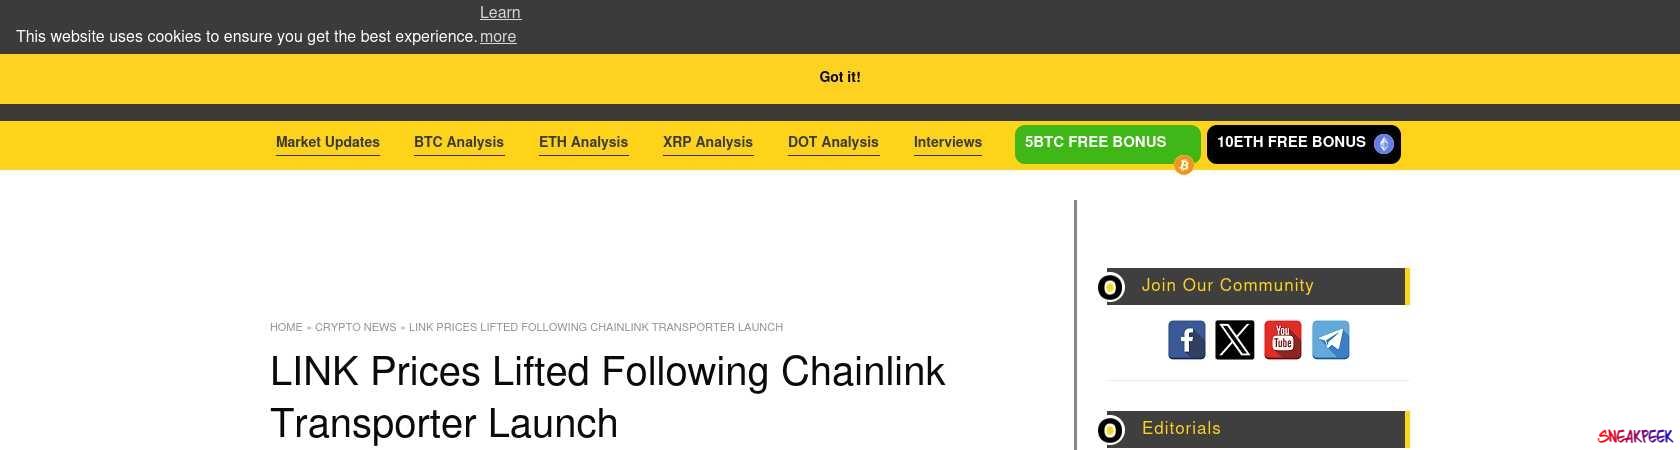 Read the full Article:  ⭲ LINK Prices Lifted Following Chainlink Transporter Launch